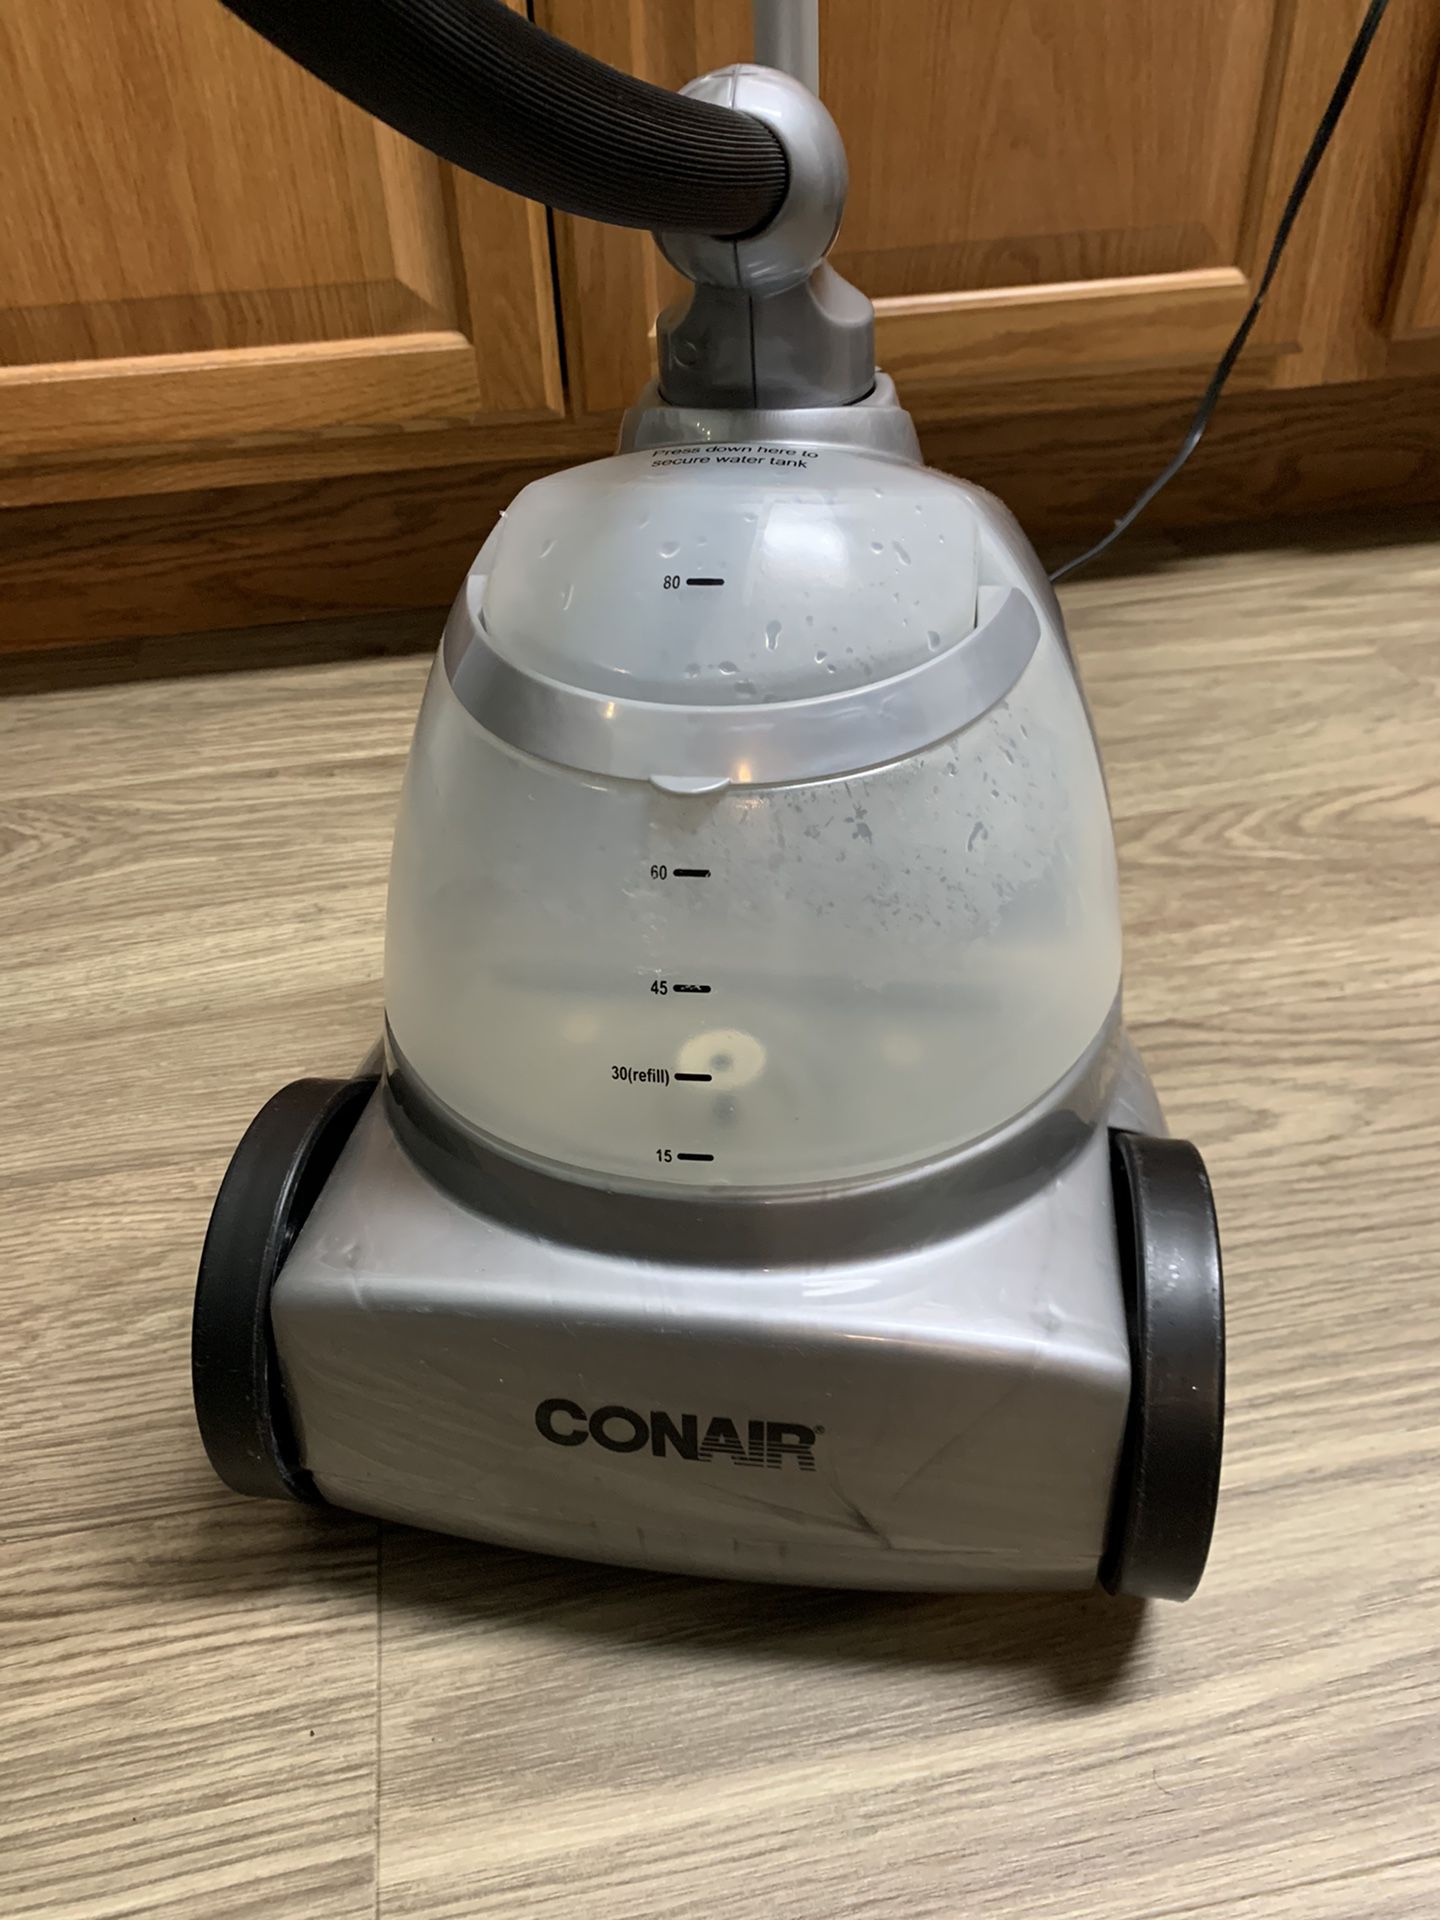 Full Size Conair Steamer for Sale in San Jose, CA - OfferUp